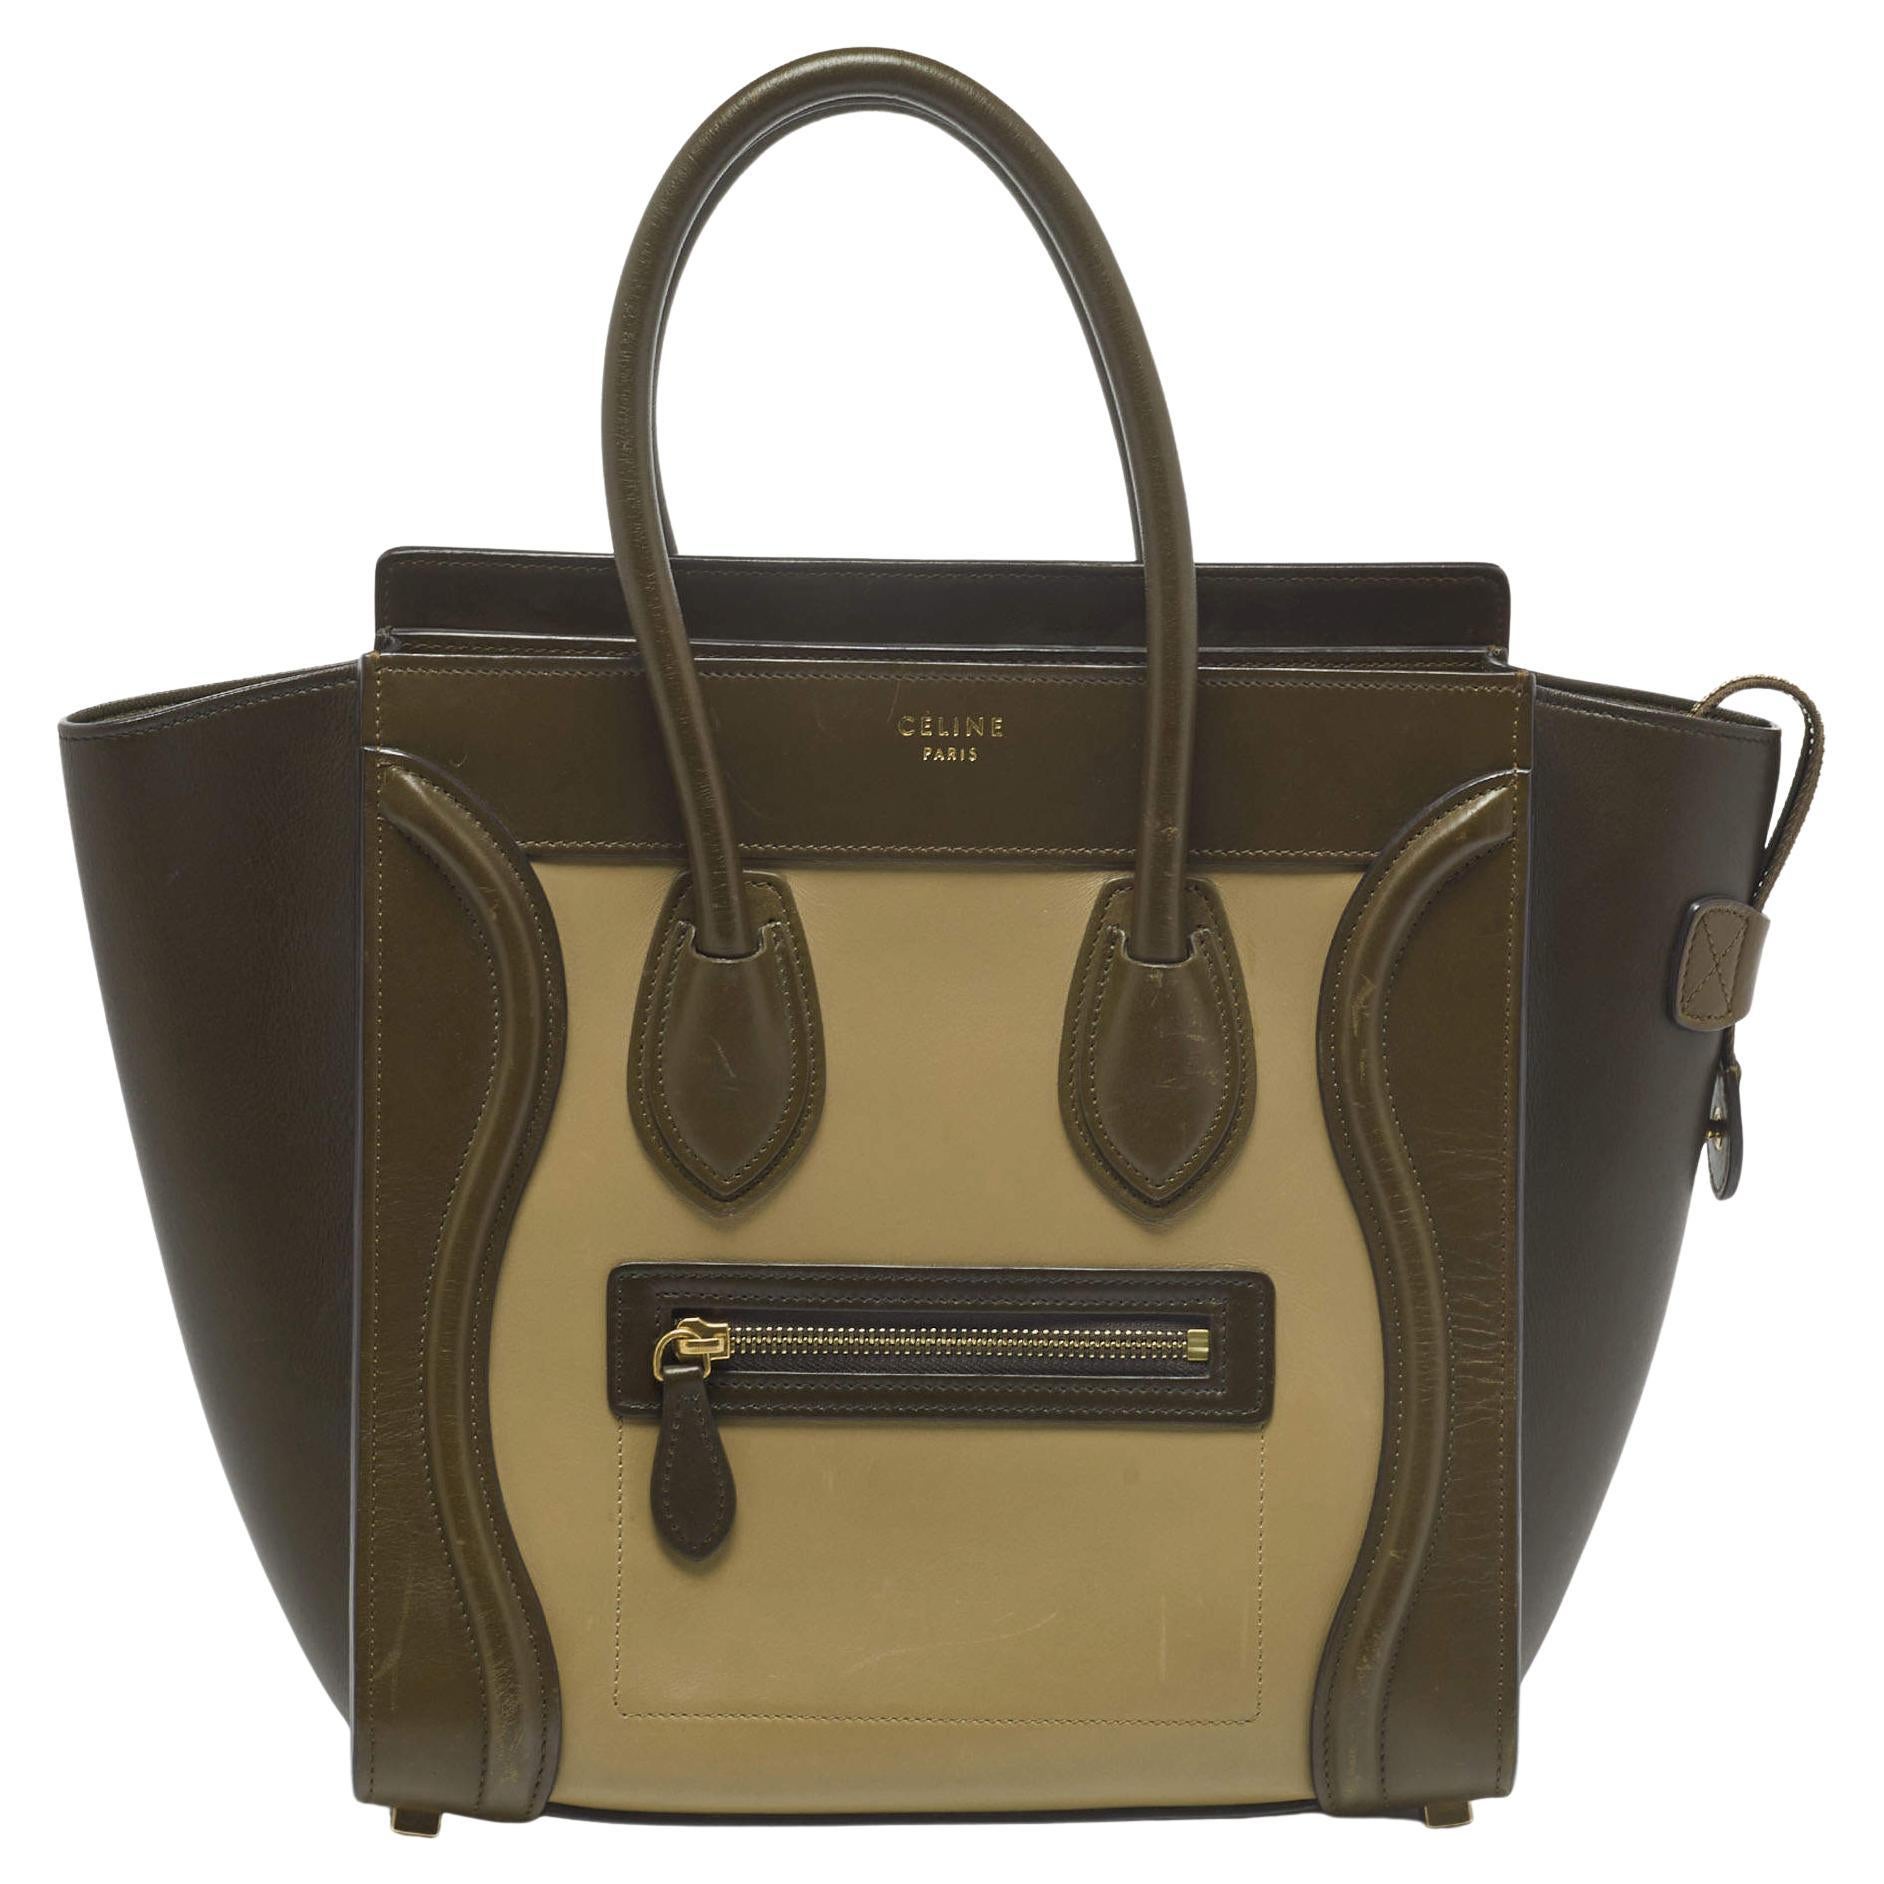 Celine Beige/Olive Green Leather Micro Luggage Tote